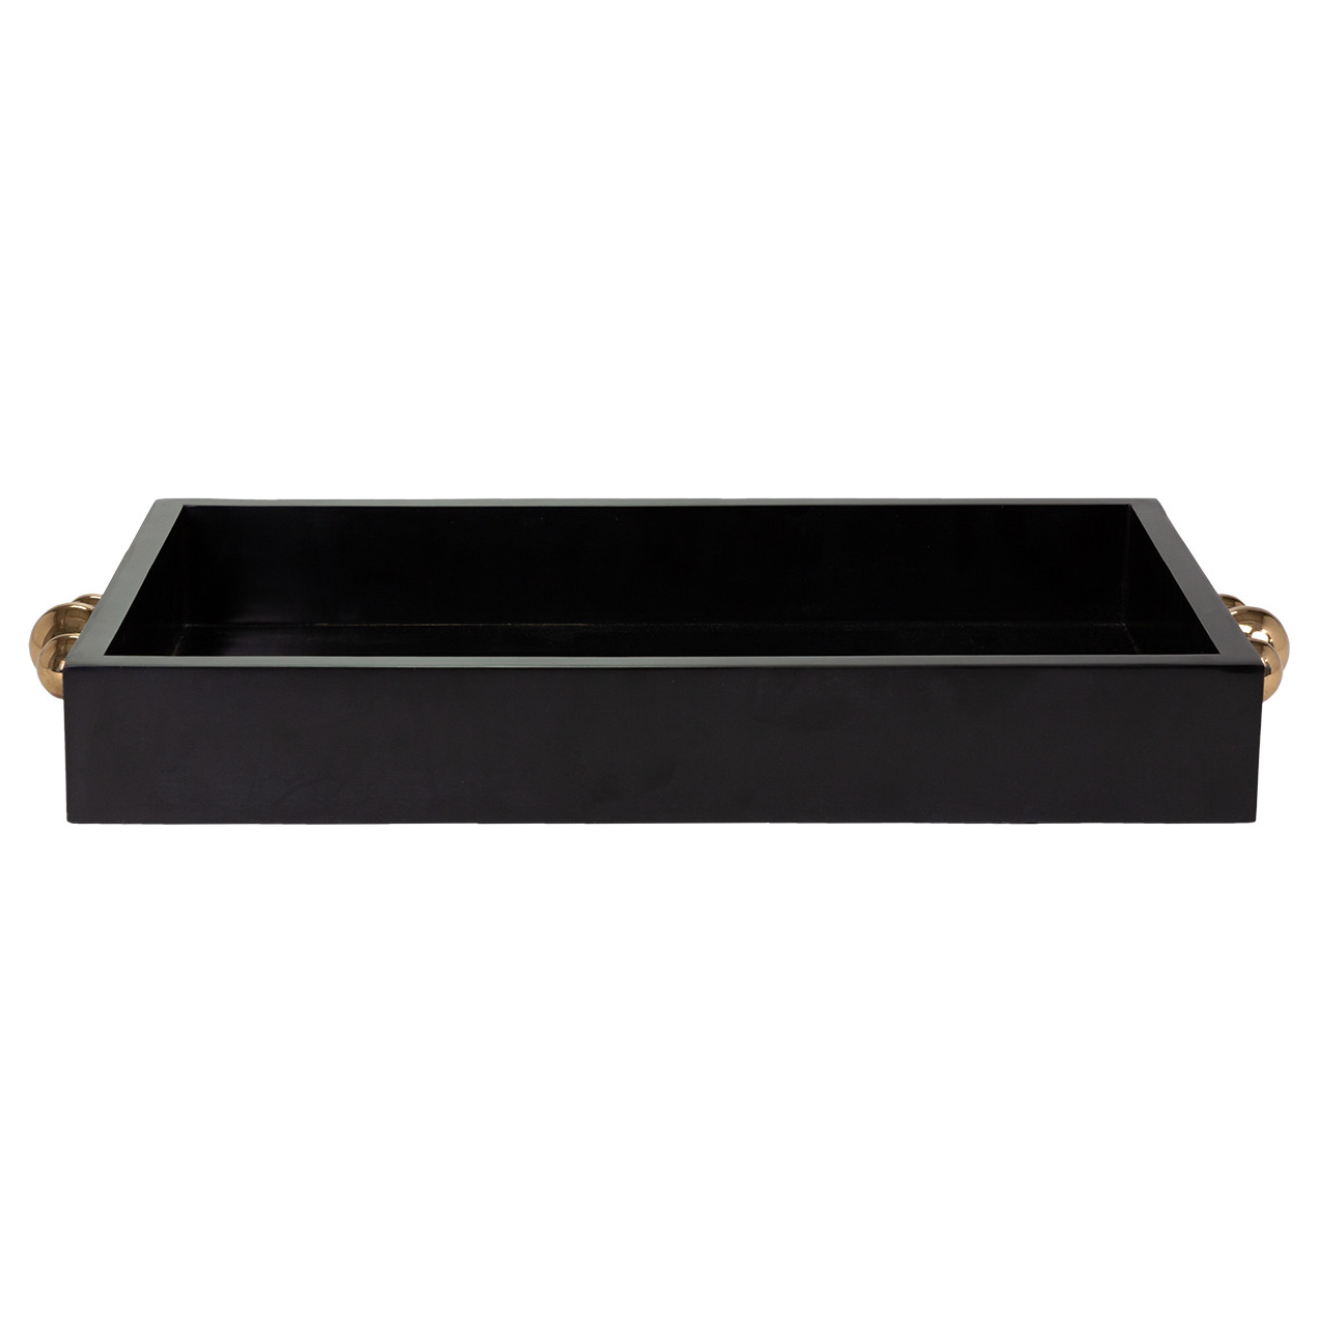 A rectangular black Ishani Tray from The Import Collection with gold handles on both ends. The product boasts a simple, sleek design and measures 20Lx12Wx3H. It is shown against a plain white background, emphasizing its elegant appeal.